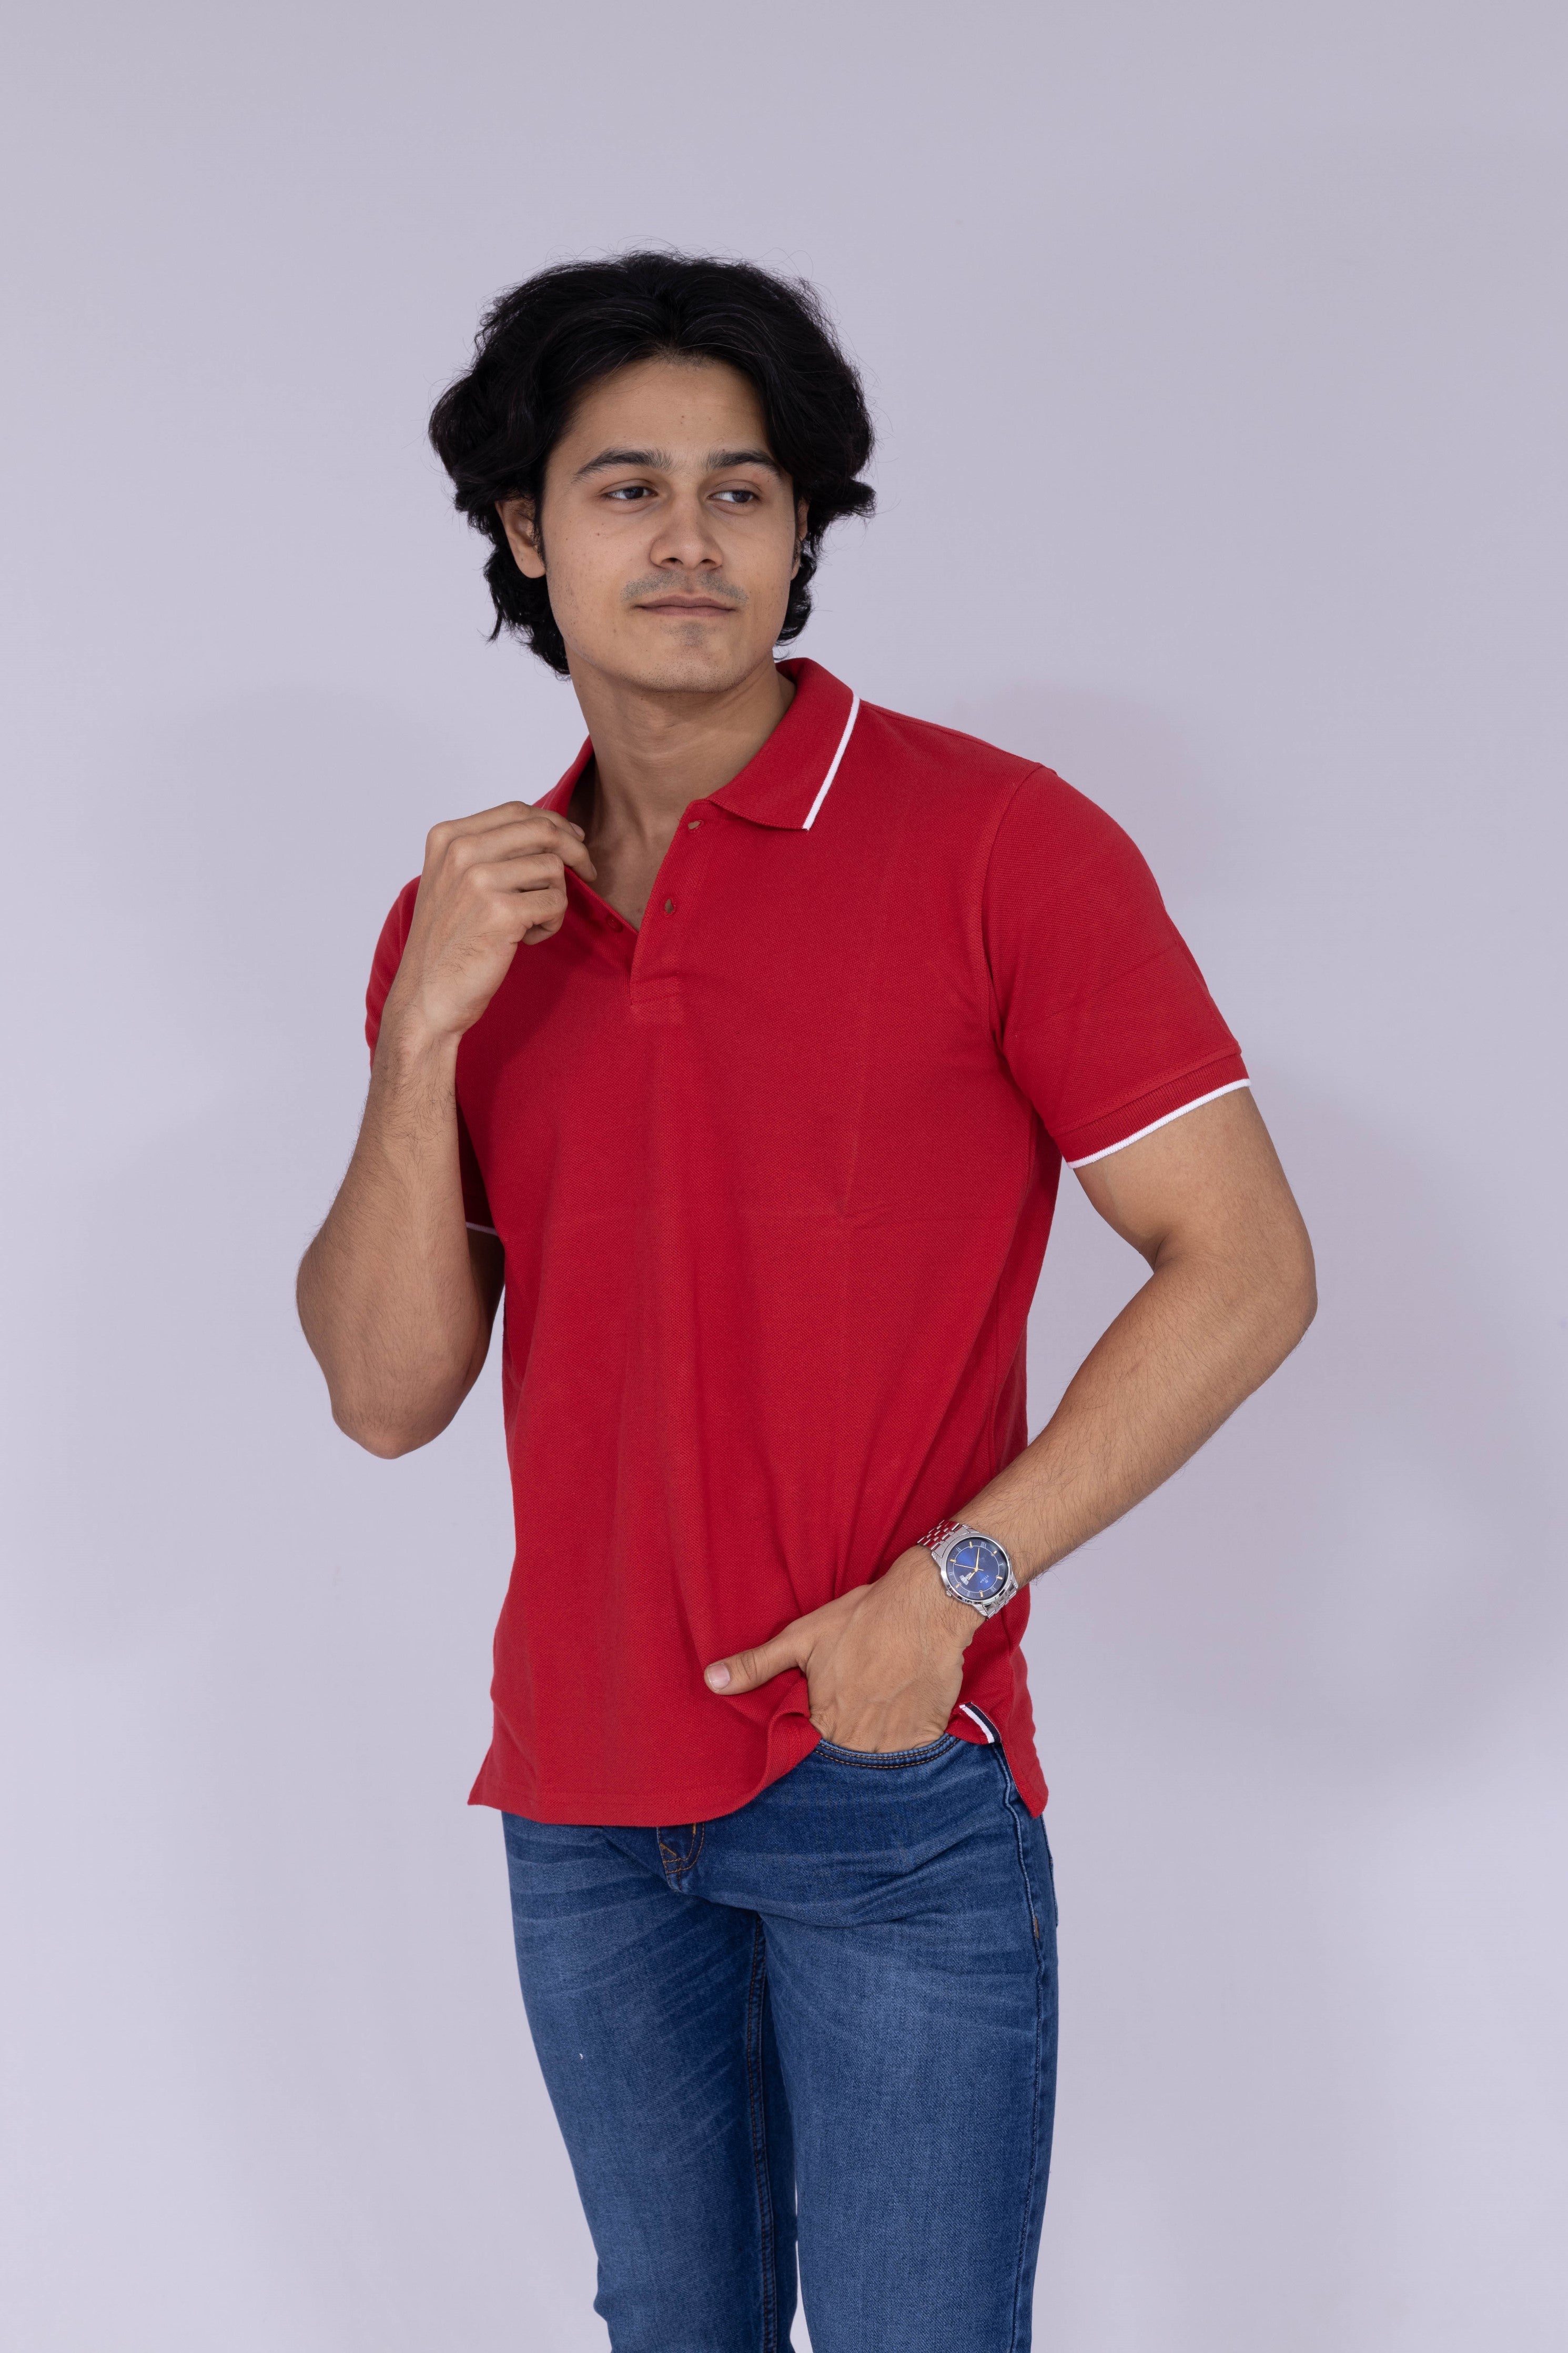 Red polo T-shirt with white tipping details